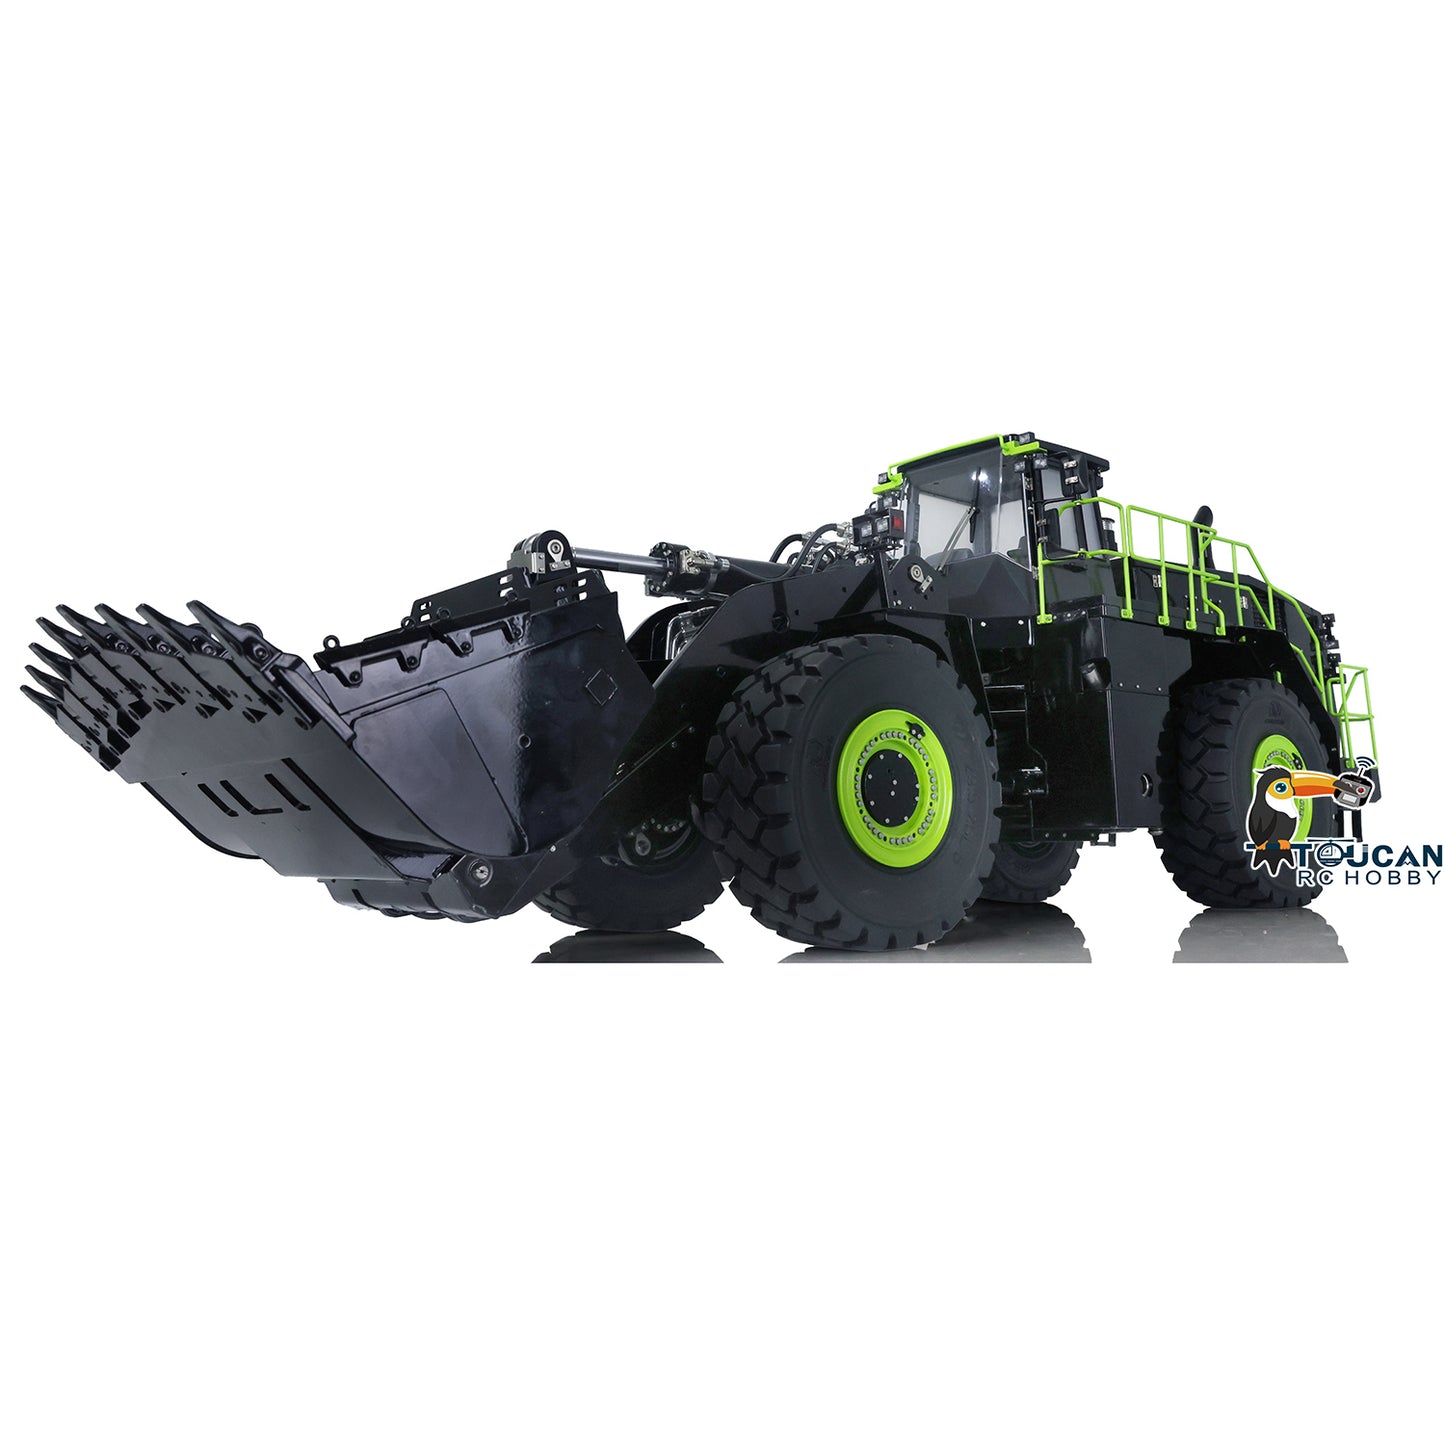 IN STOCK Kabolite 988K Metal RC 1/14 Hydraulic Heavy Loader K988 100S PL18 Lite Radio Control Truck Upgraded Vehicle RTR 6CH Reversing Valve